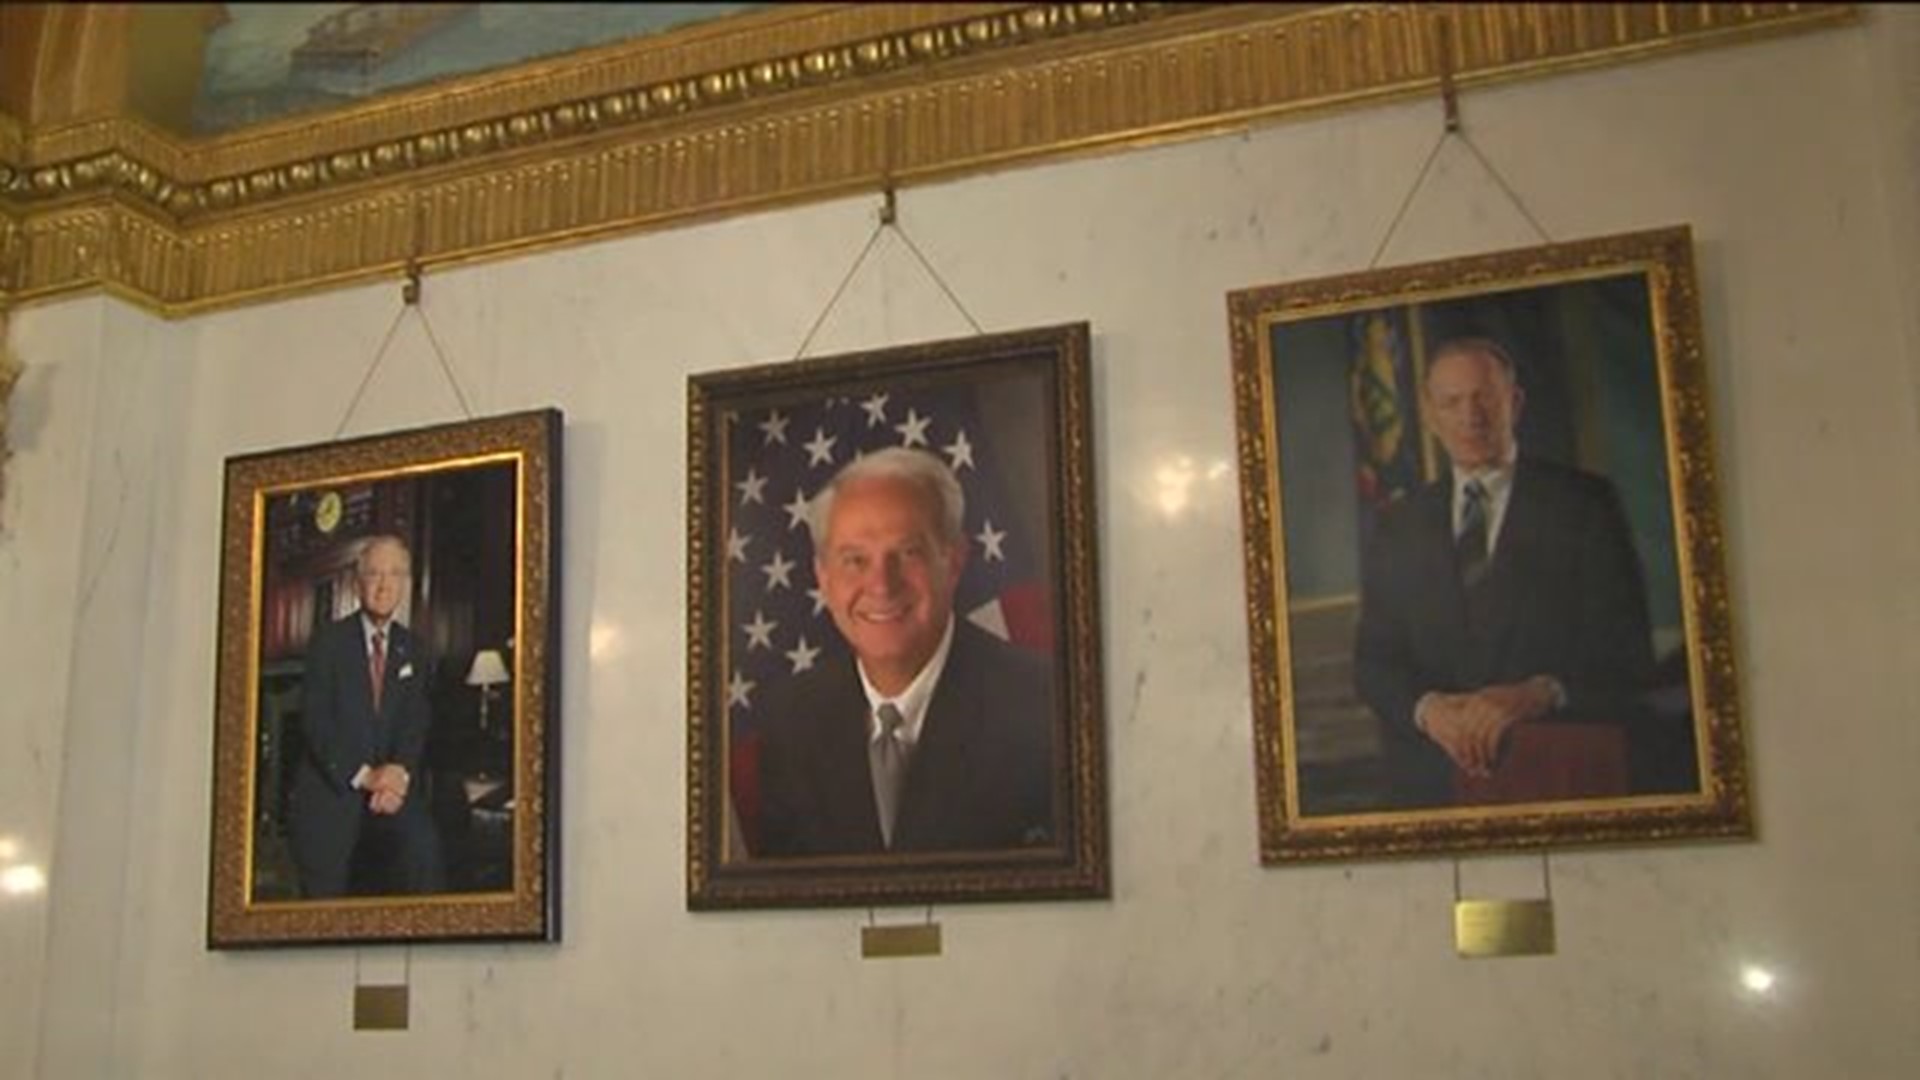 Plaque Added to Mellow Portrait in Capitol, Mentions Corruption